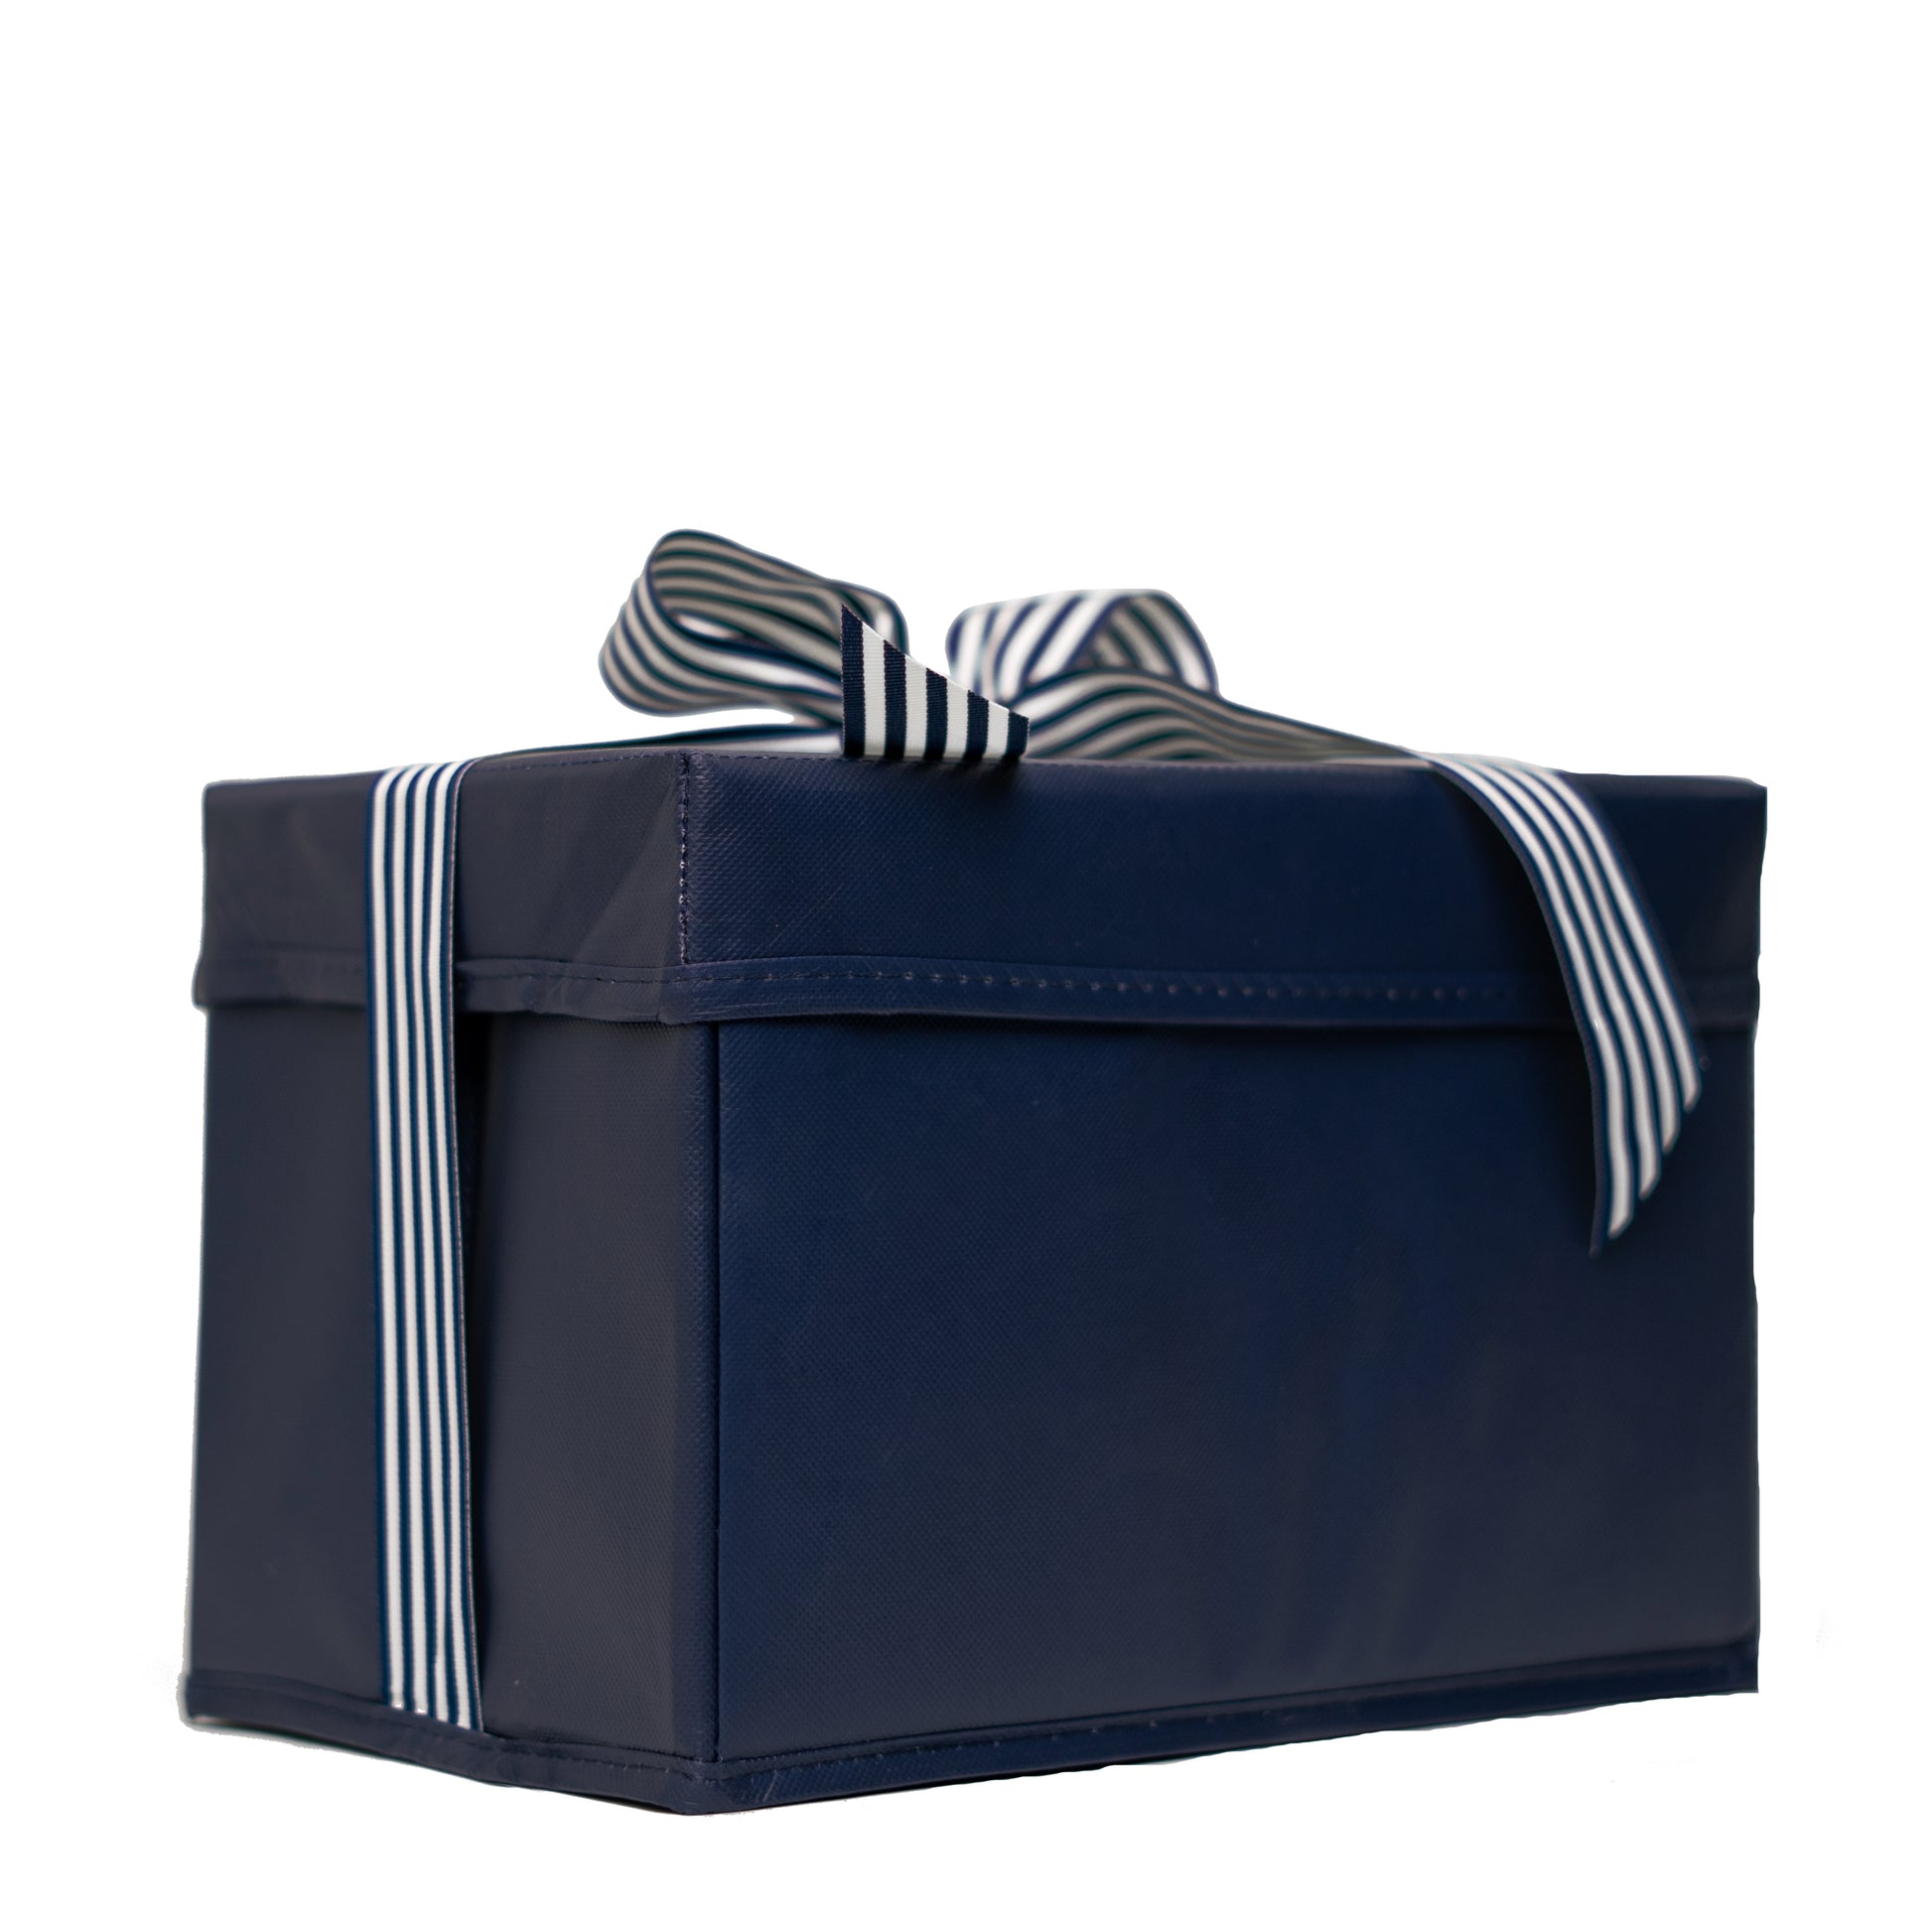 Small Shoebox-Sized Blue Collapsible Gift Box with ribbon attached, great zero waste solution for sustainable and eco-friendly gift boxes - EverWrap